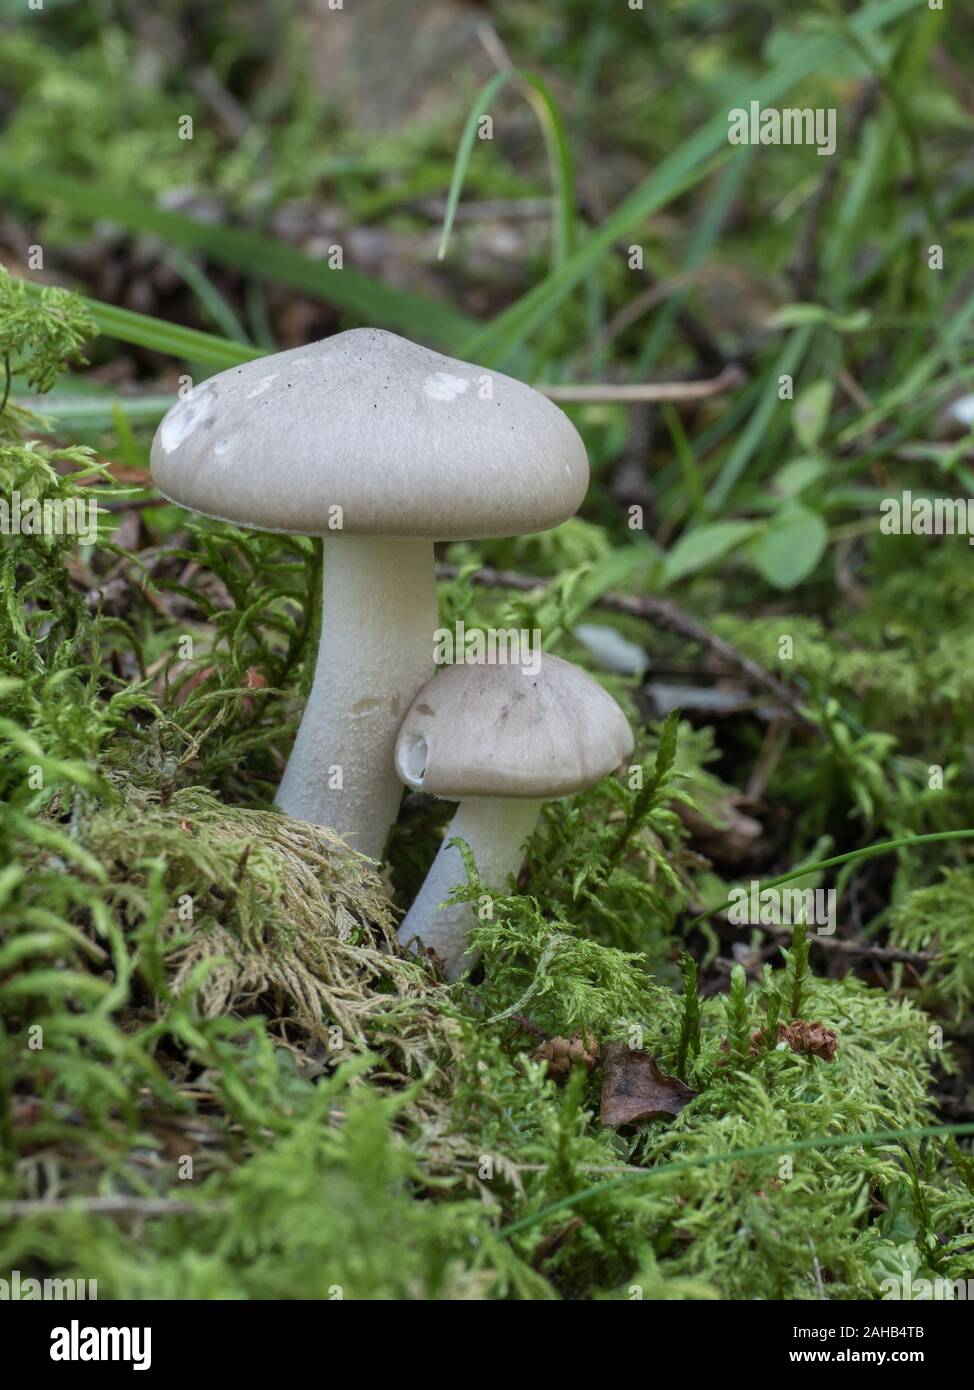 Hygrophorus agathosmus, commonly known as the gray almond waxy cap or the almond woodwax. Görvälns naturreservat, Sweden. Stock Photo